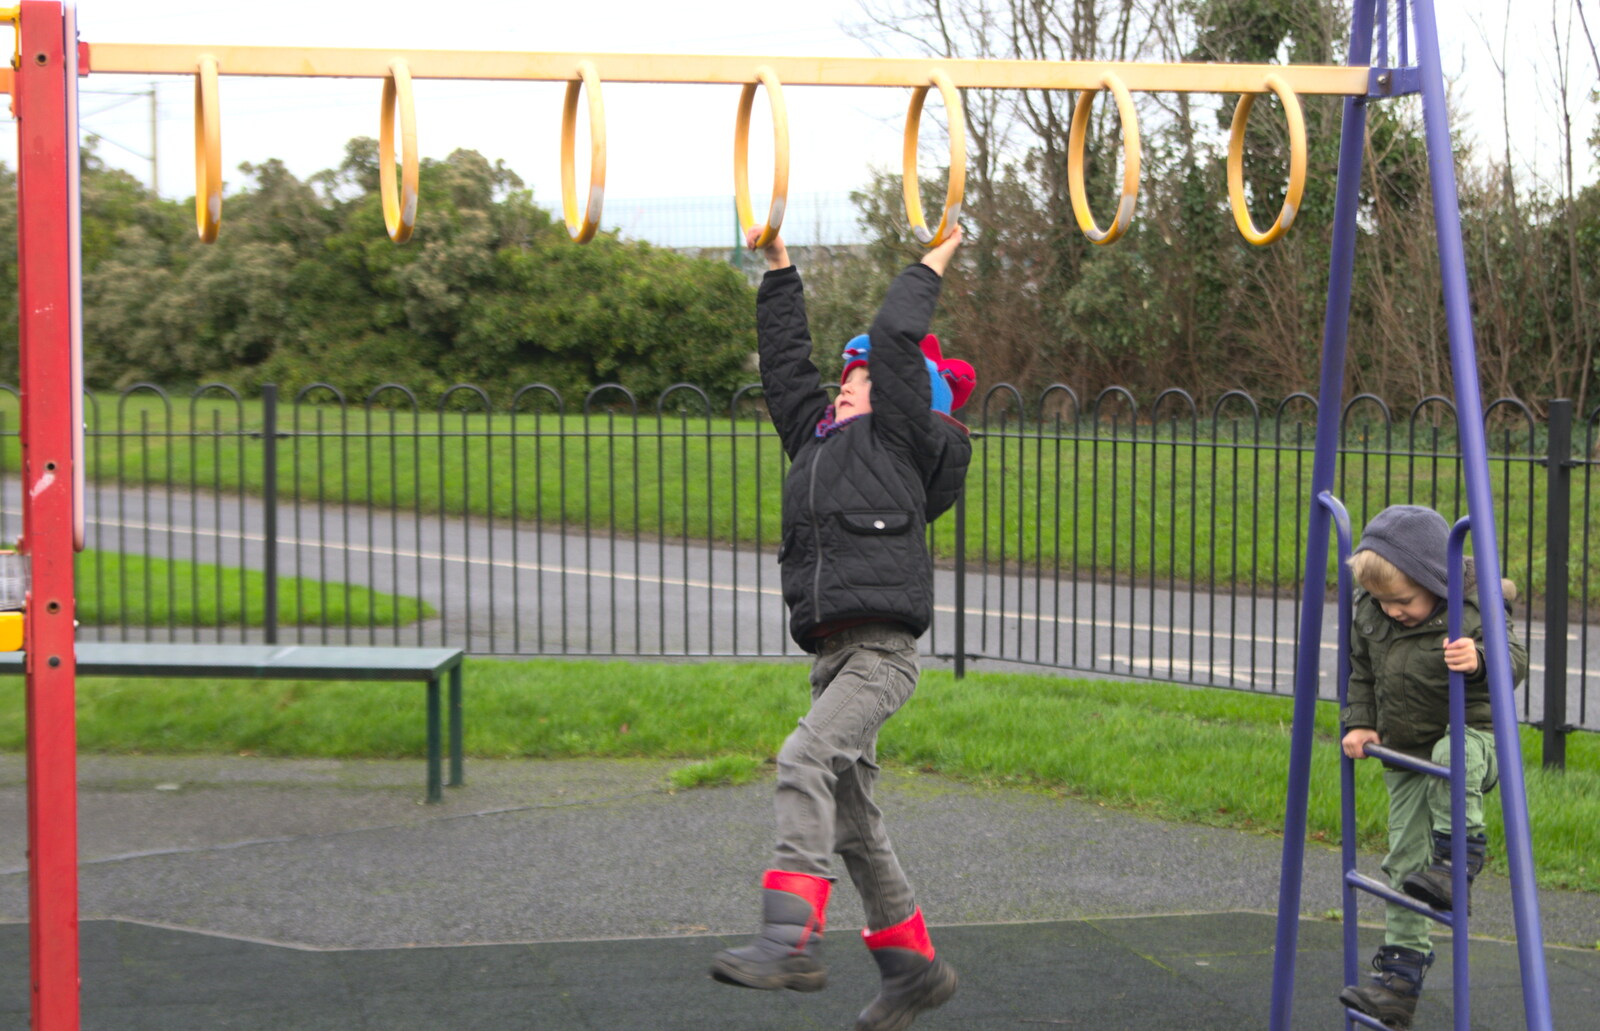 Fred on the monkey bars from Conwy, Holyhead and the Ferry to Ireland - 21st December 2015